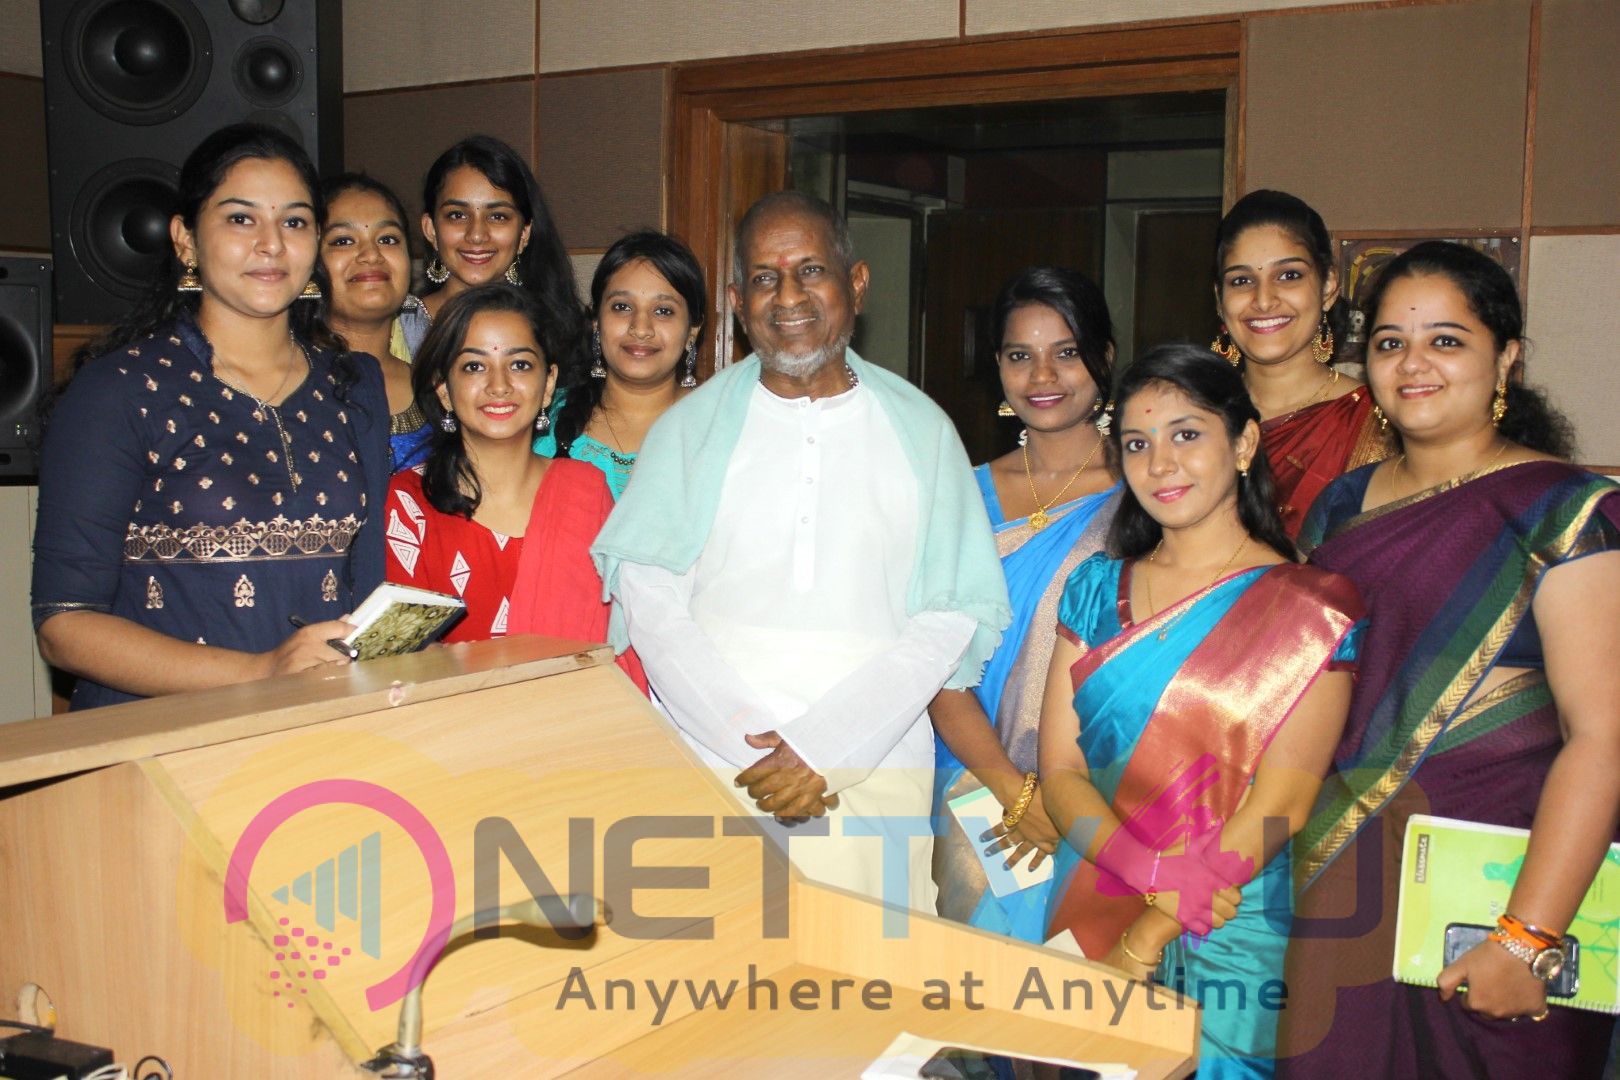 Ilayaraja Selected 9 Of The Students Be Singing Soon For The Composer In His Films Pics Tamil Gallery